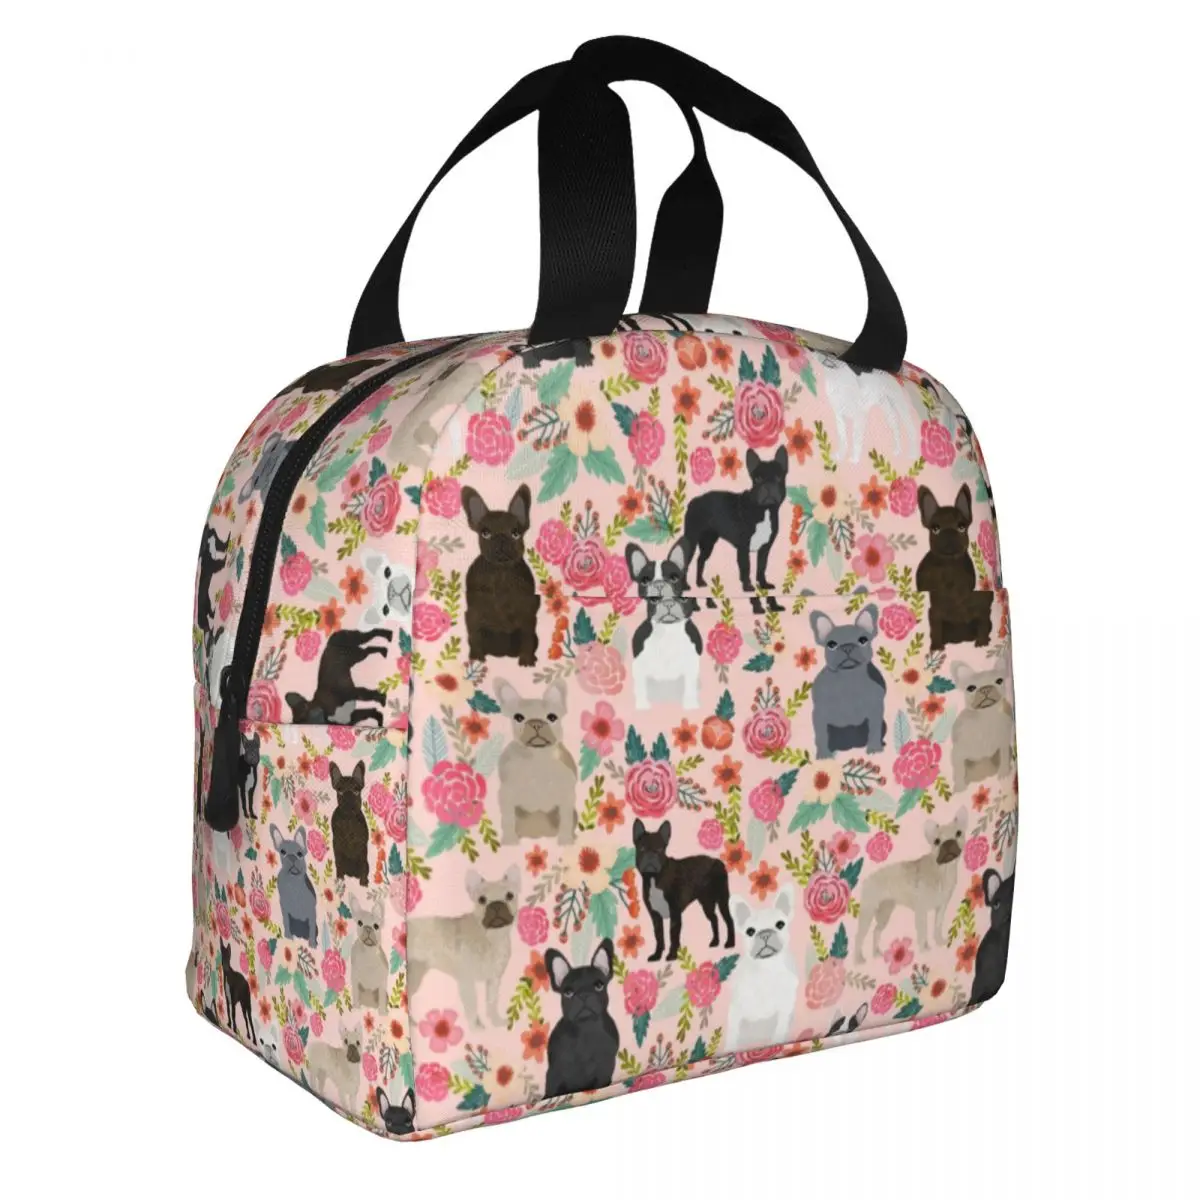 Frenchies Dog French Bulldog Florals Print Lunch Bag Insulated Thermal Cooler Lunch Box For Women Kids School Work Food Bags